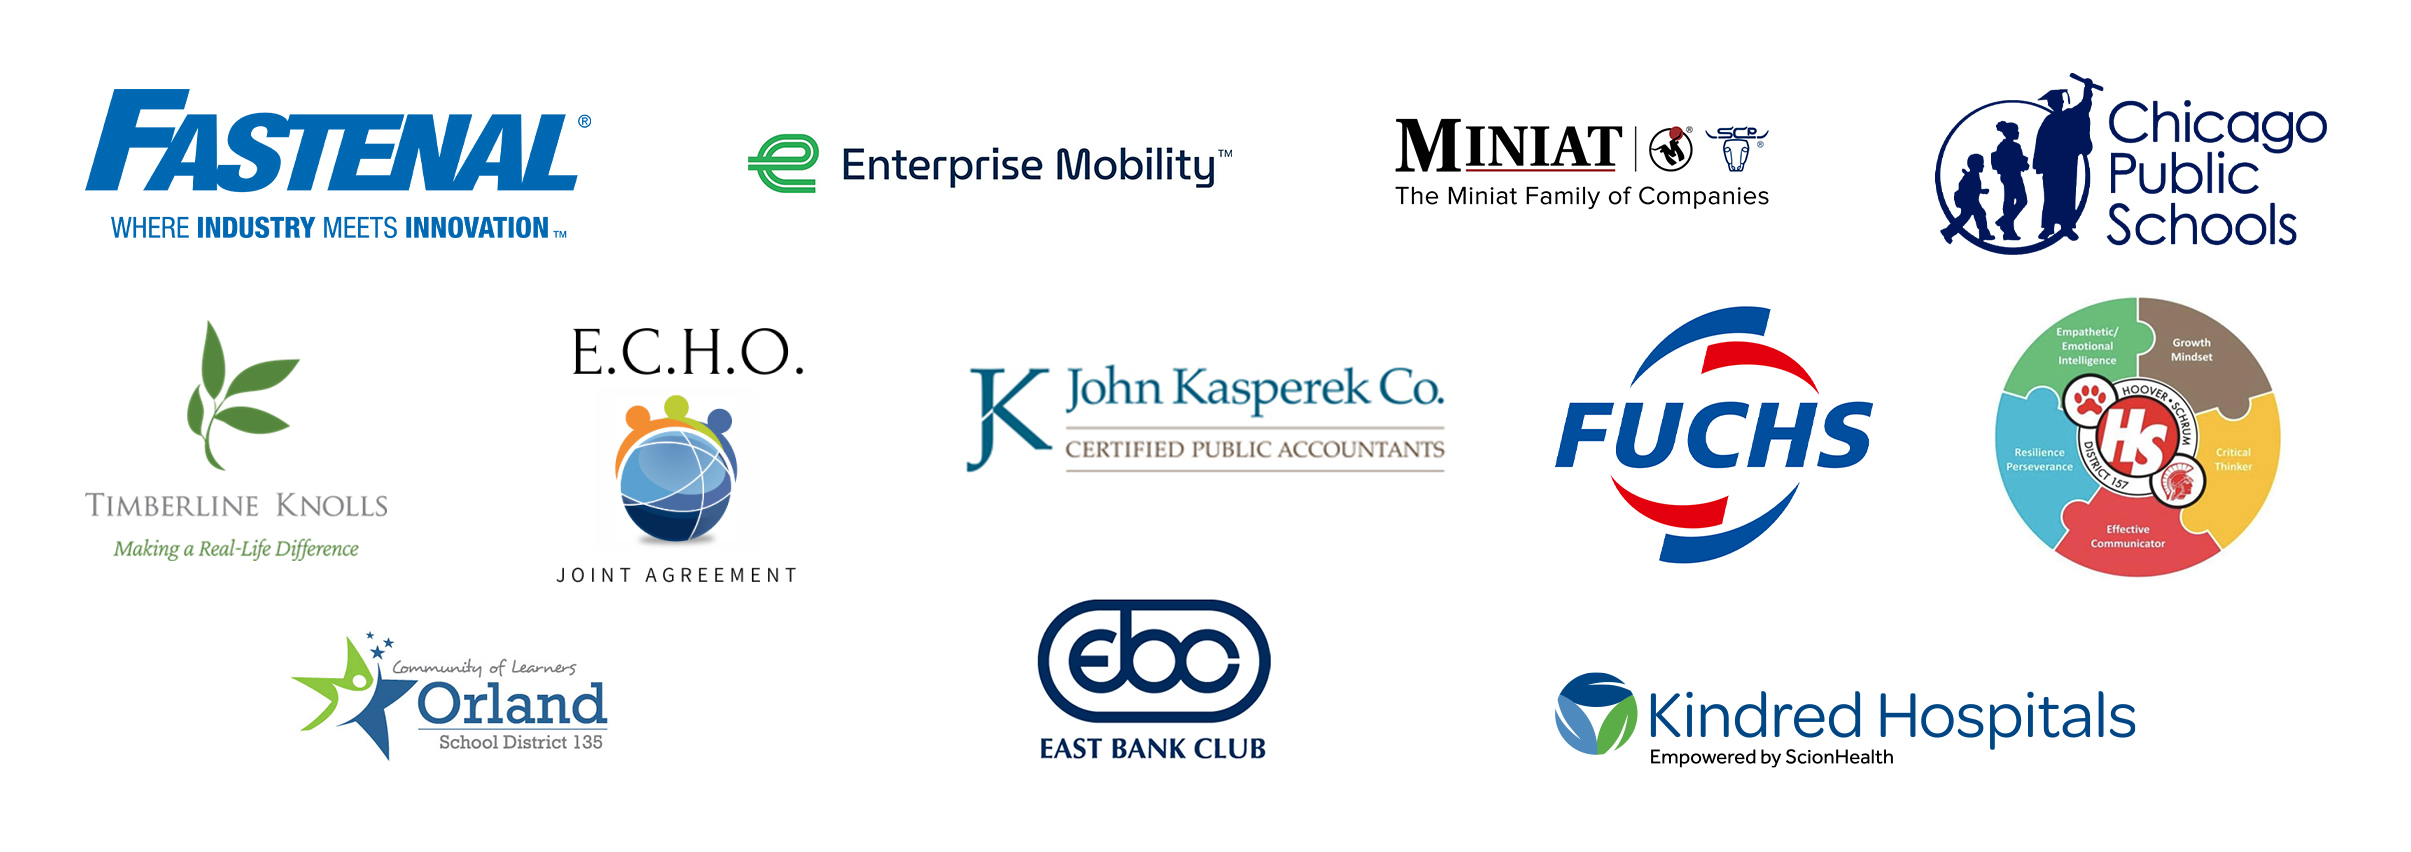 College-to-Career Expo Sponsors